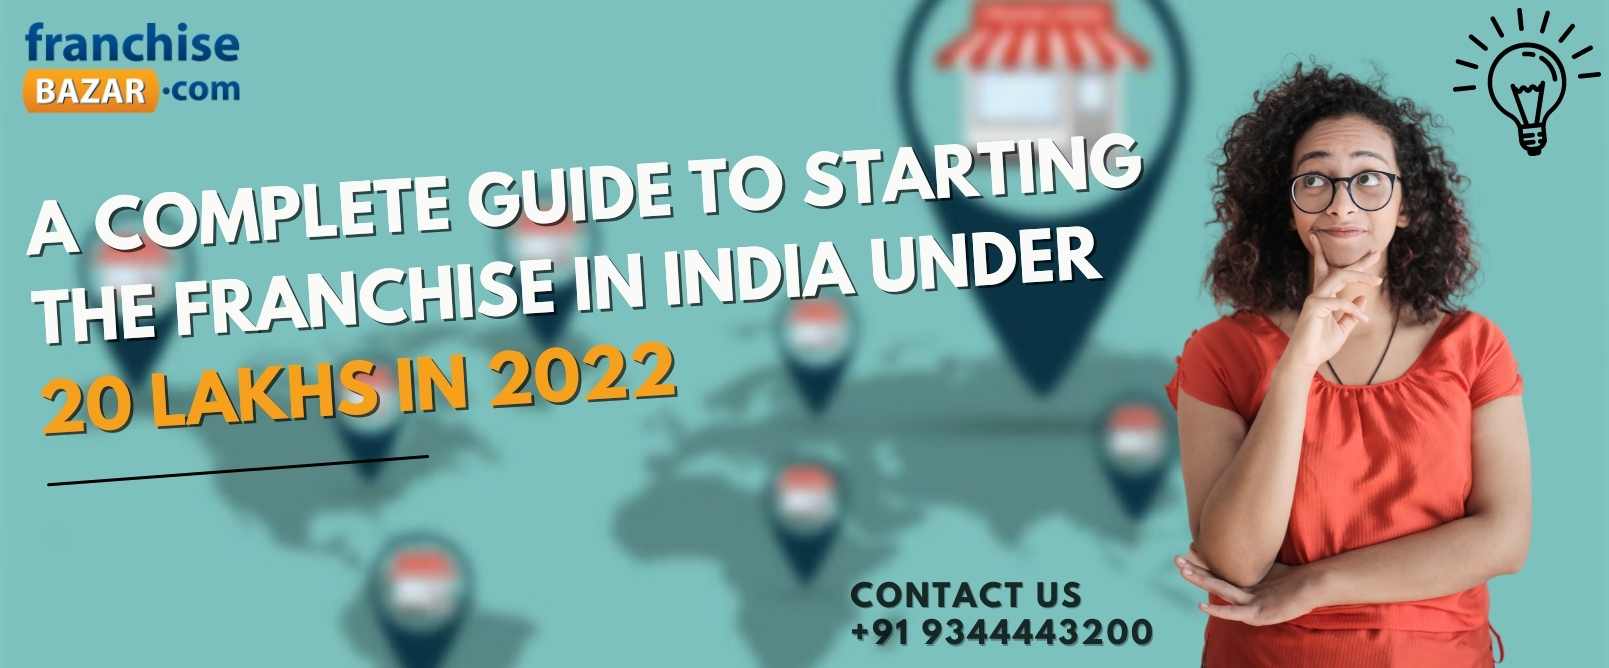 A Complete Guide To Starting The Franchise In India Under 20 Lakhs In 2022	